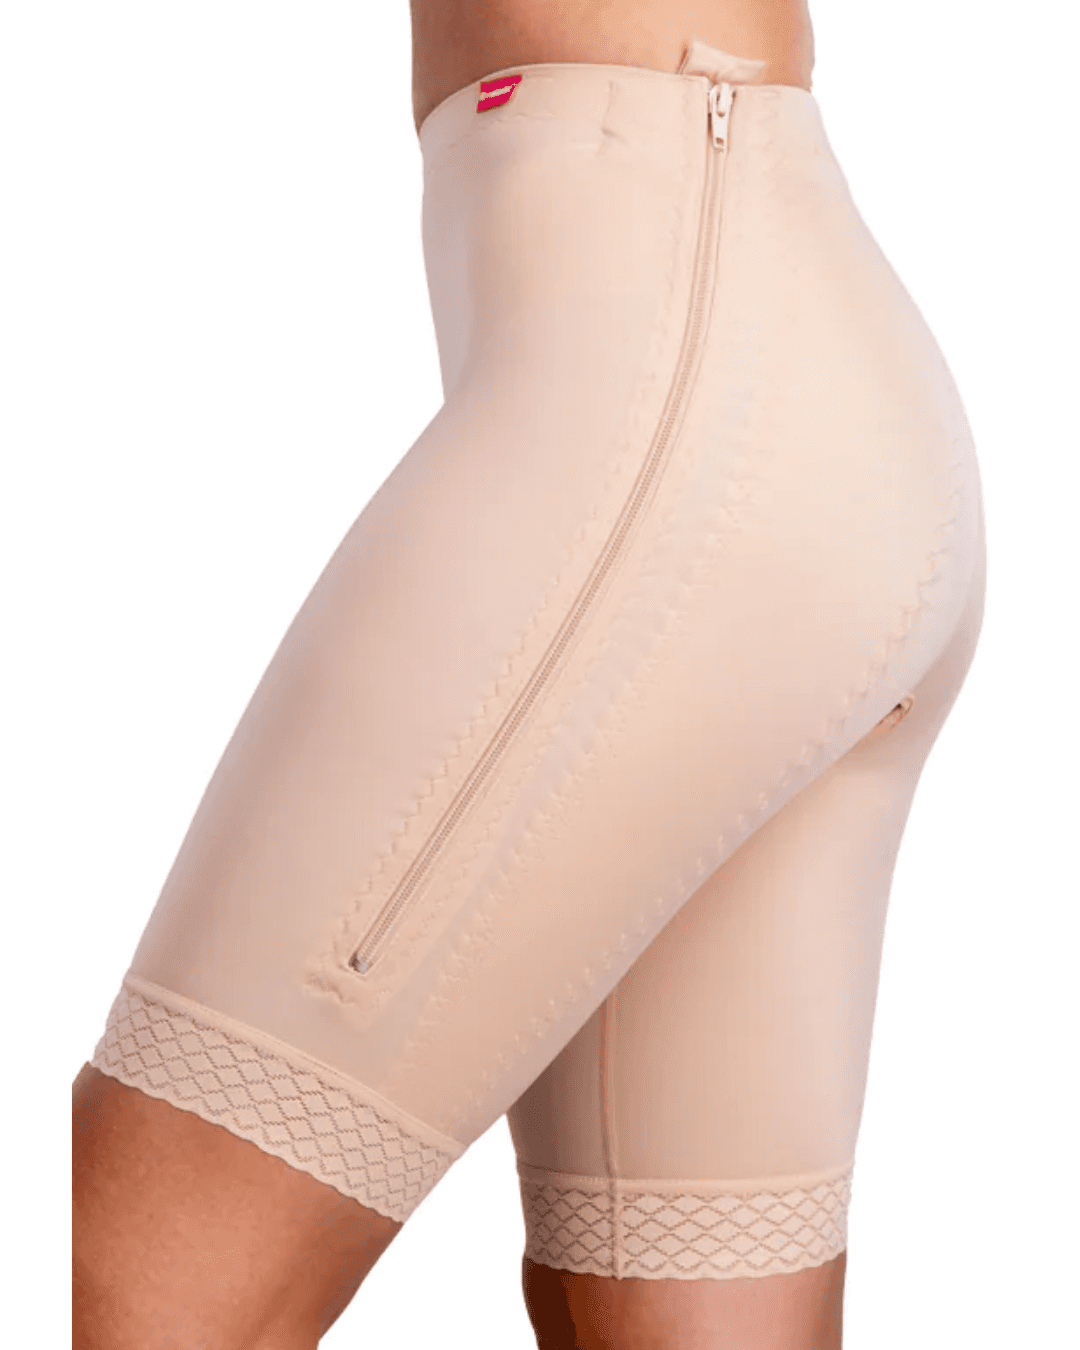 Mid-Thigh Girdle For Postpartum/surgery